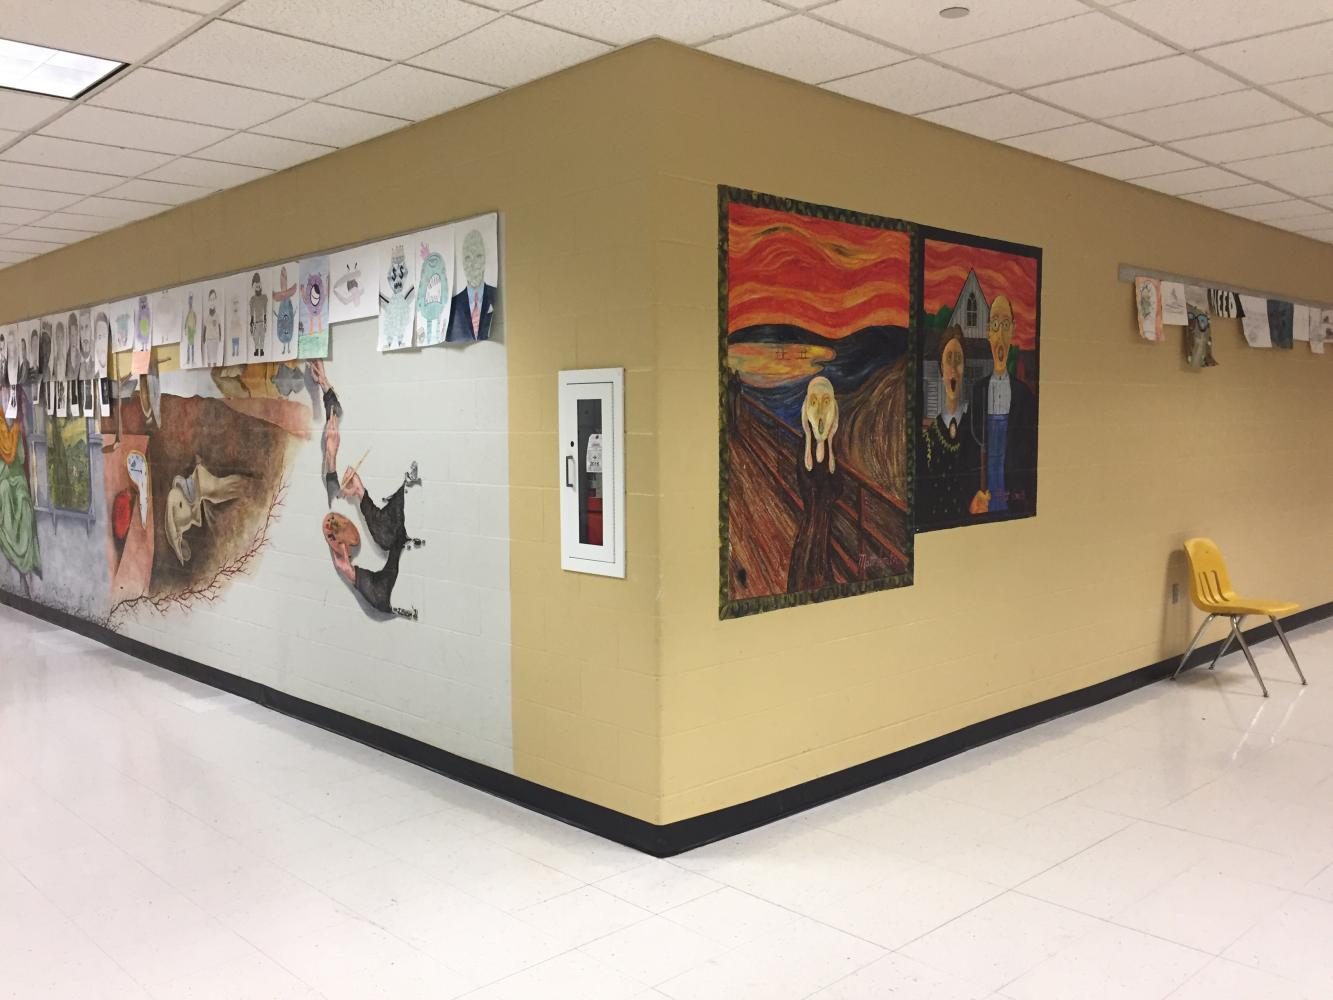 In the art hallway, murals have been added to be showcased along students artwork.